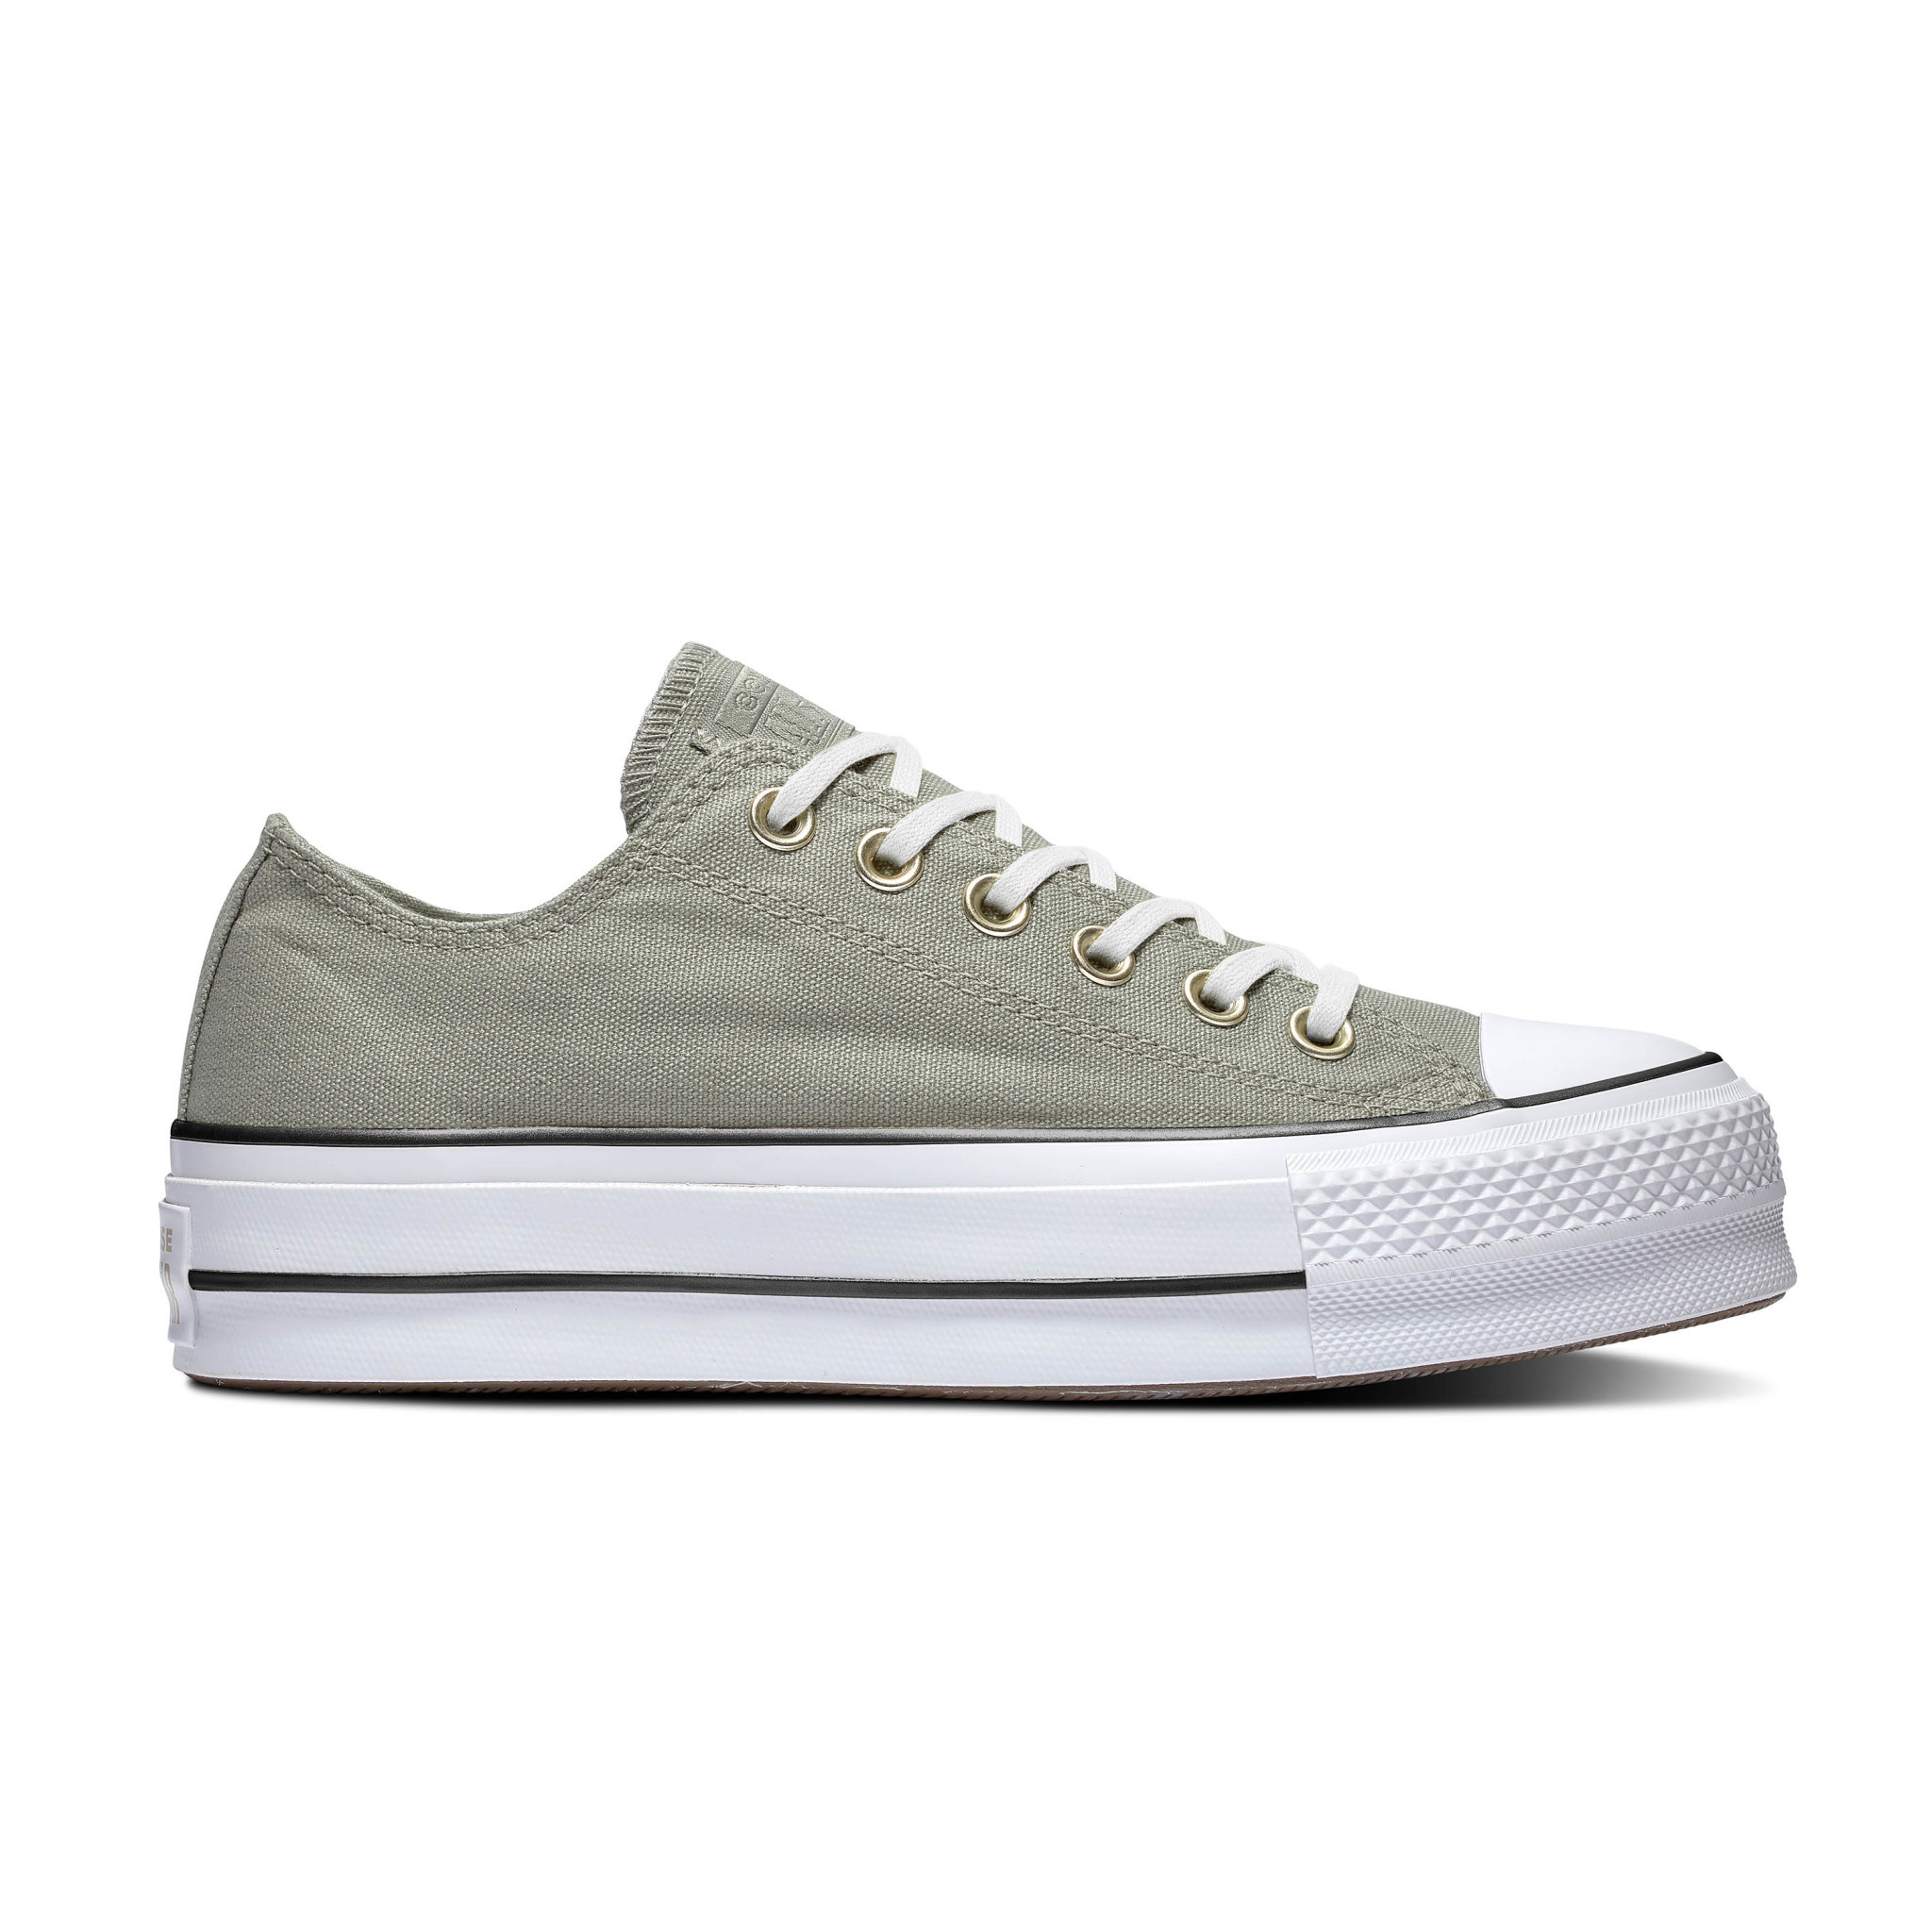 stone chuck taylor all star ox trainers